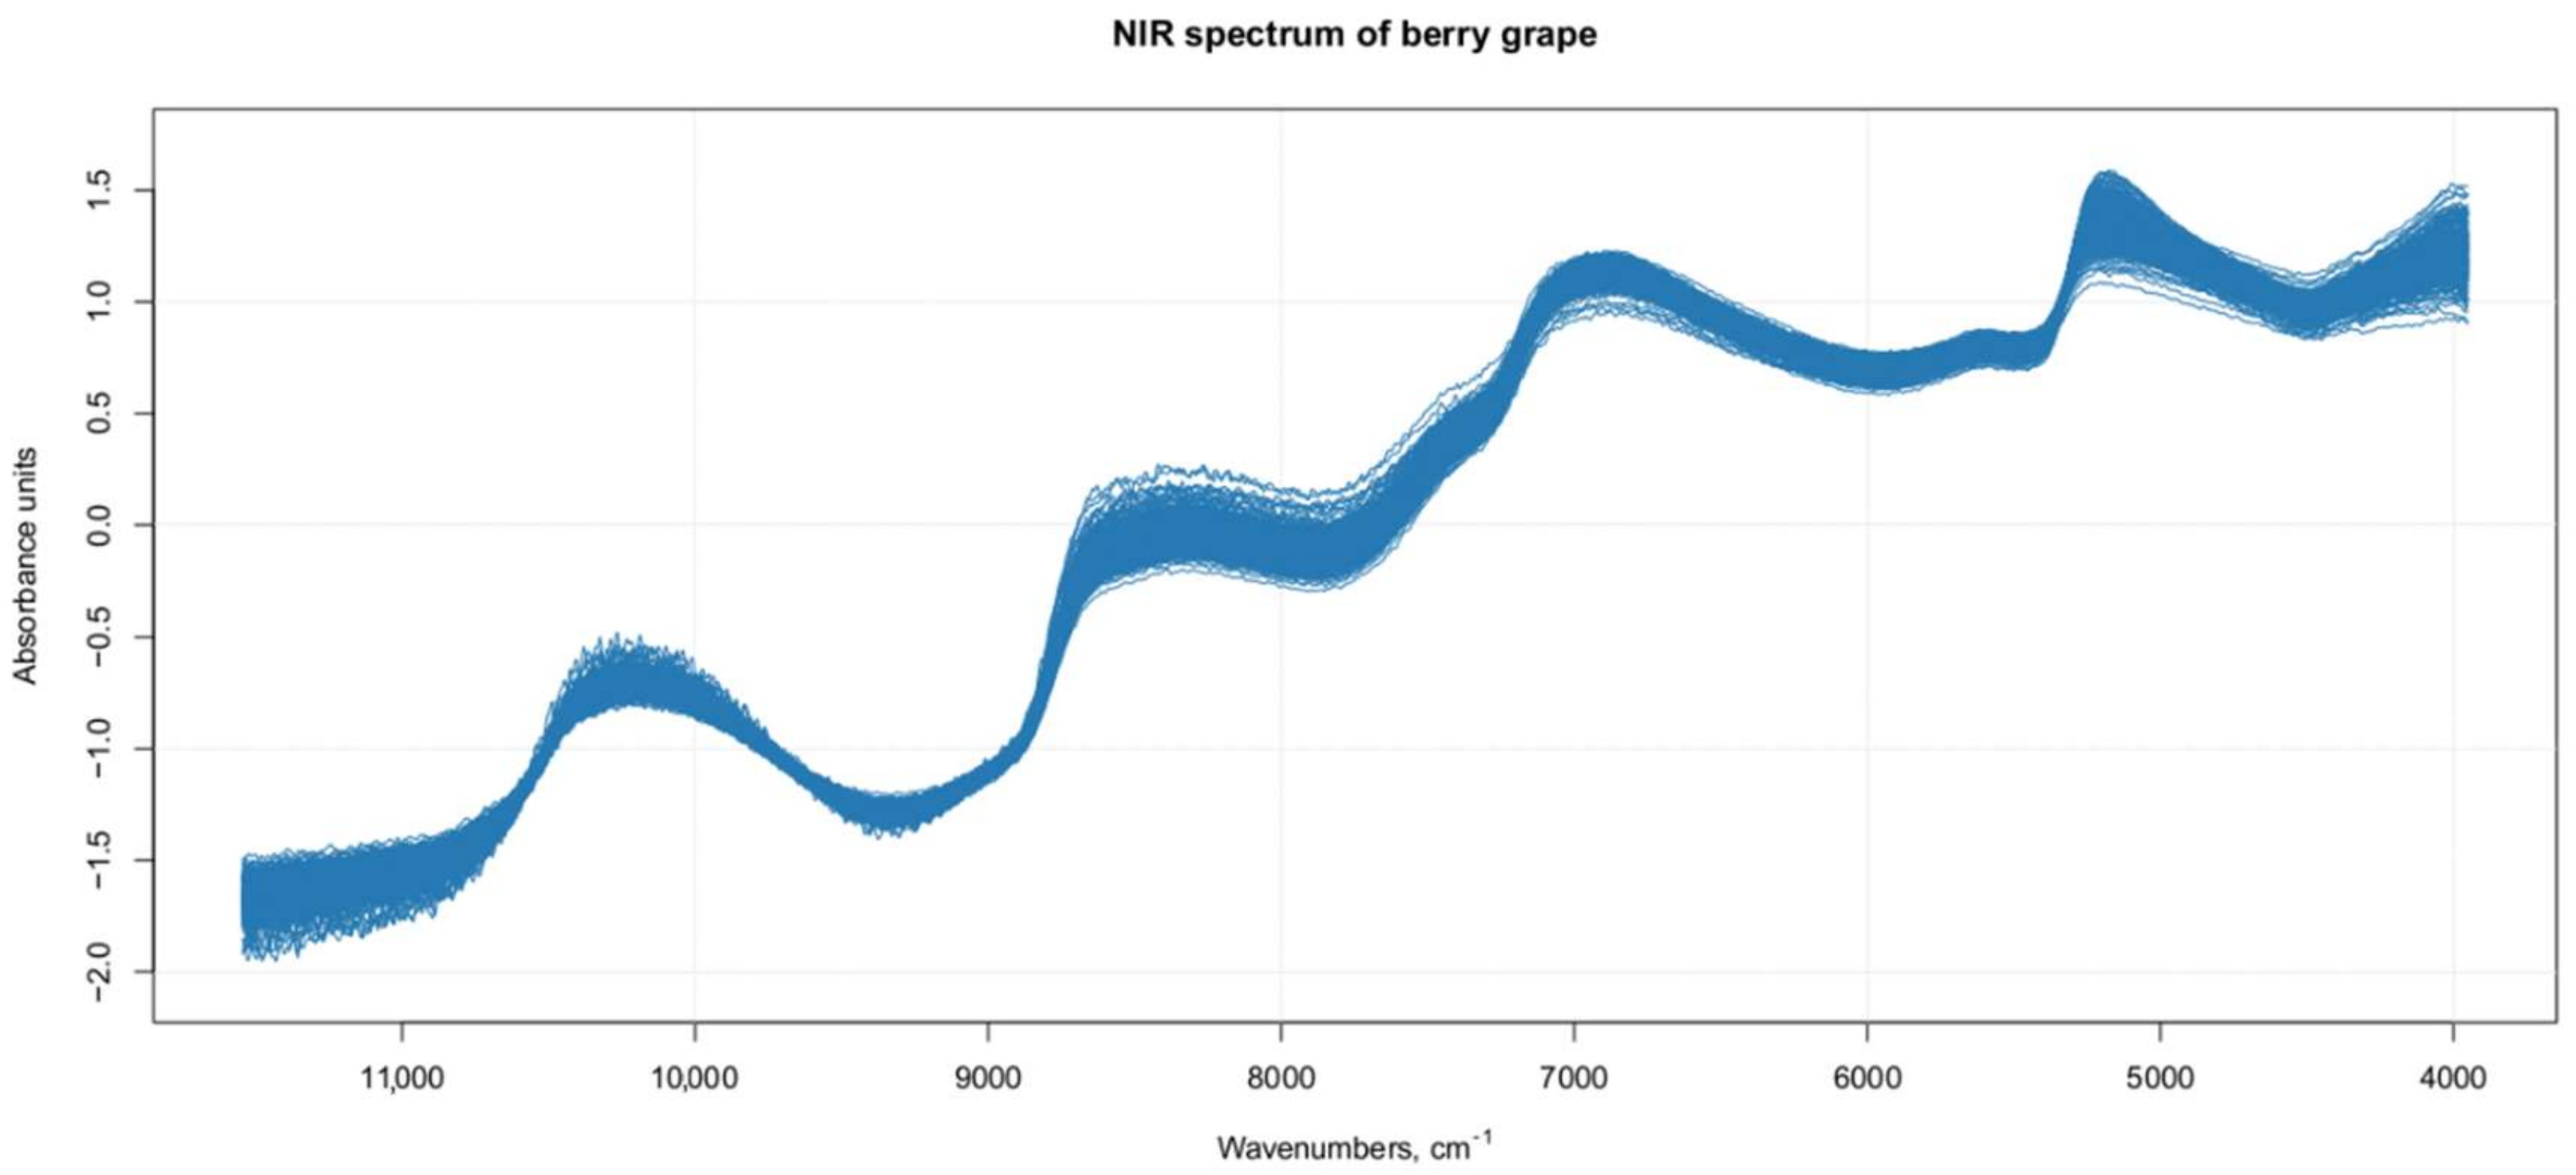 Foods | Free Full-Text | Use of Artificial Neural Networks and NIR  Spectroscopy for Non-Destructive Grape Texture Prediction | HTML